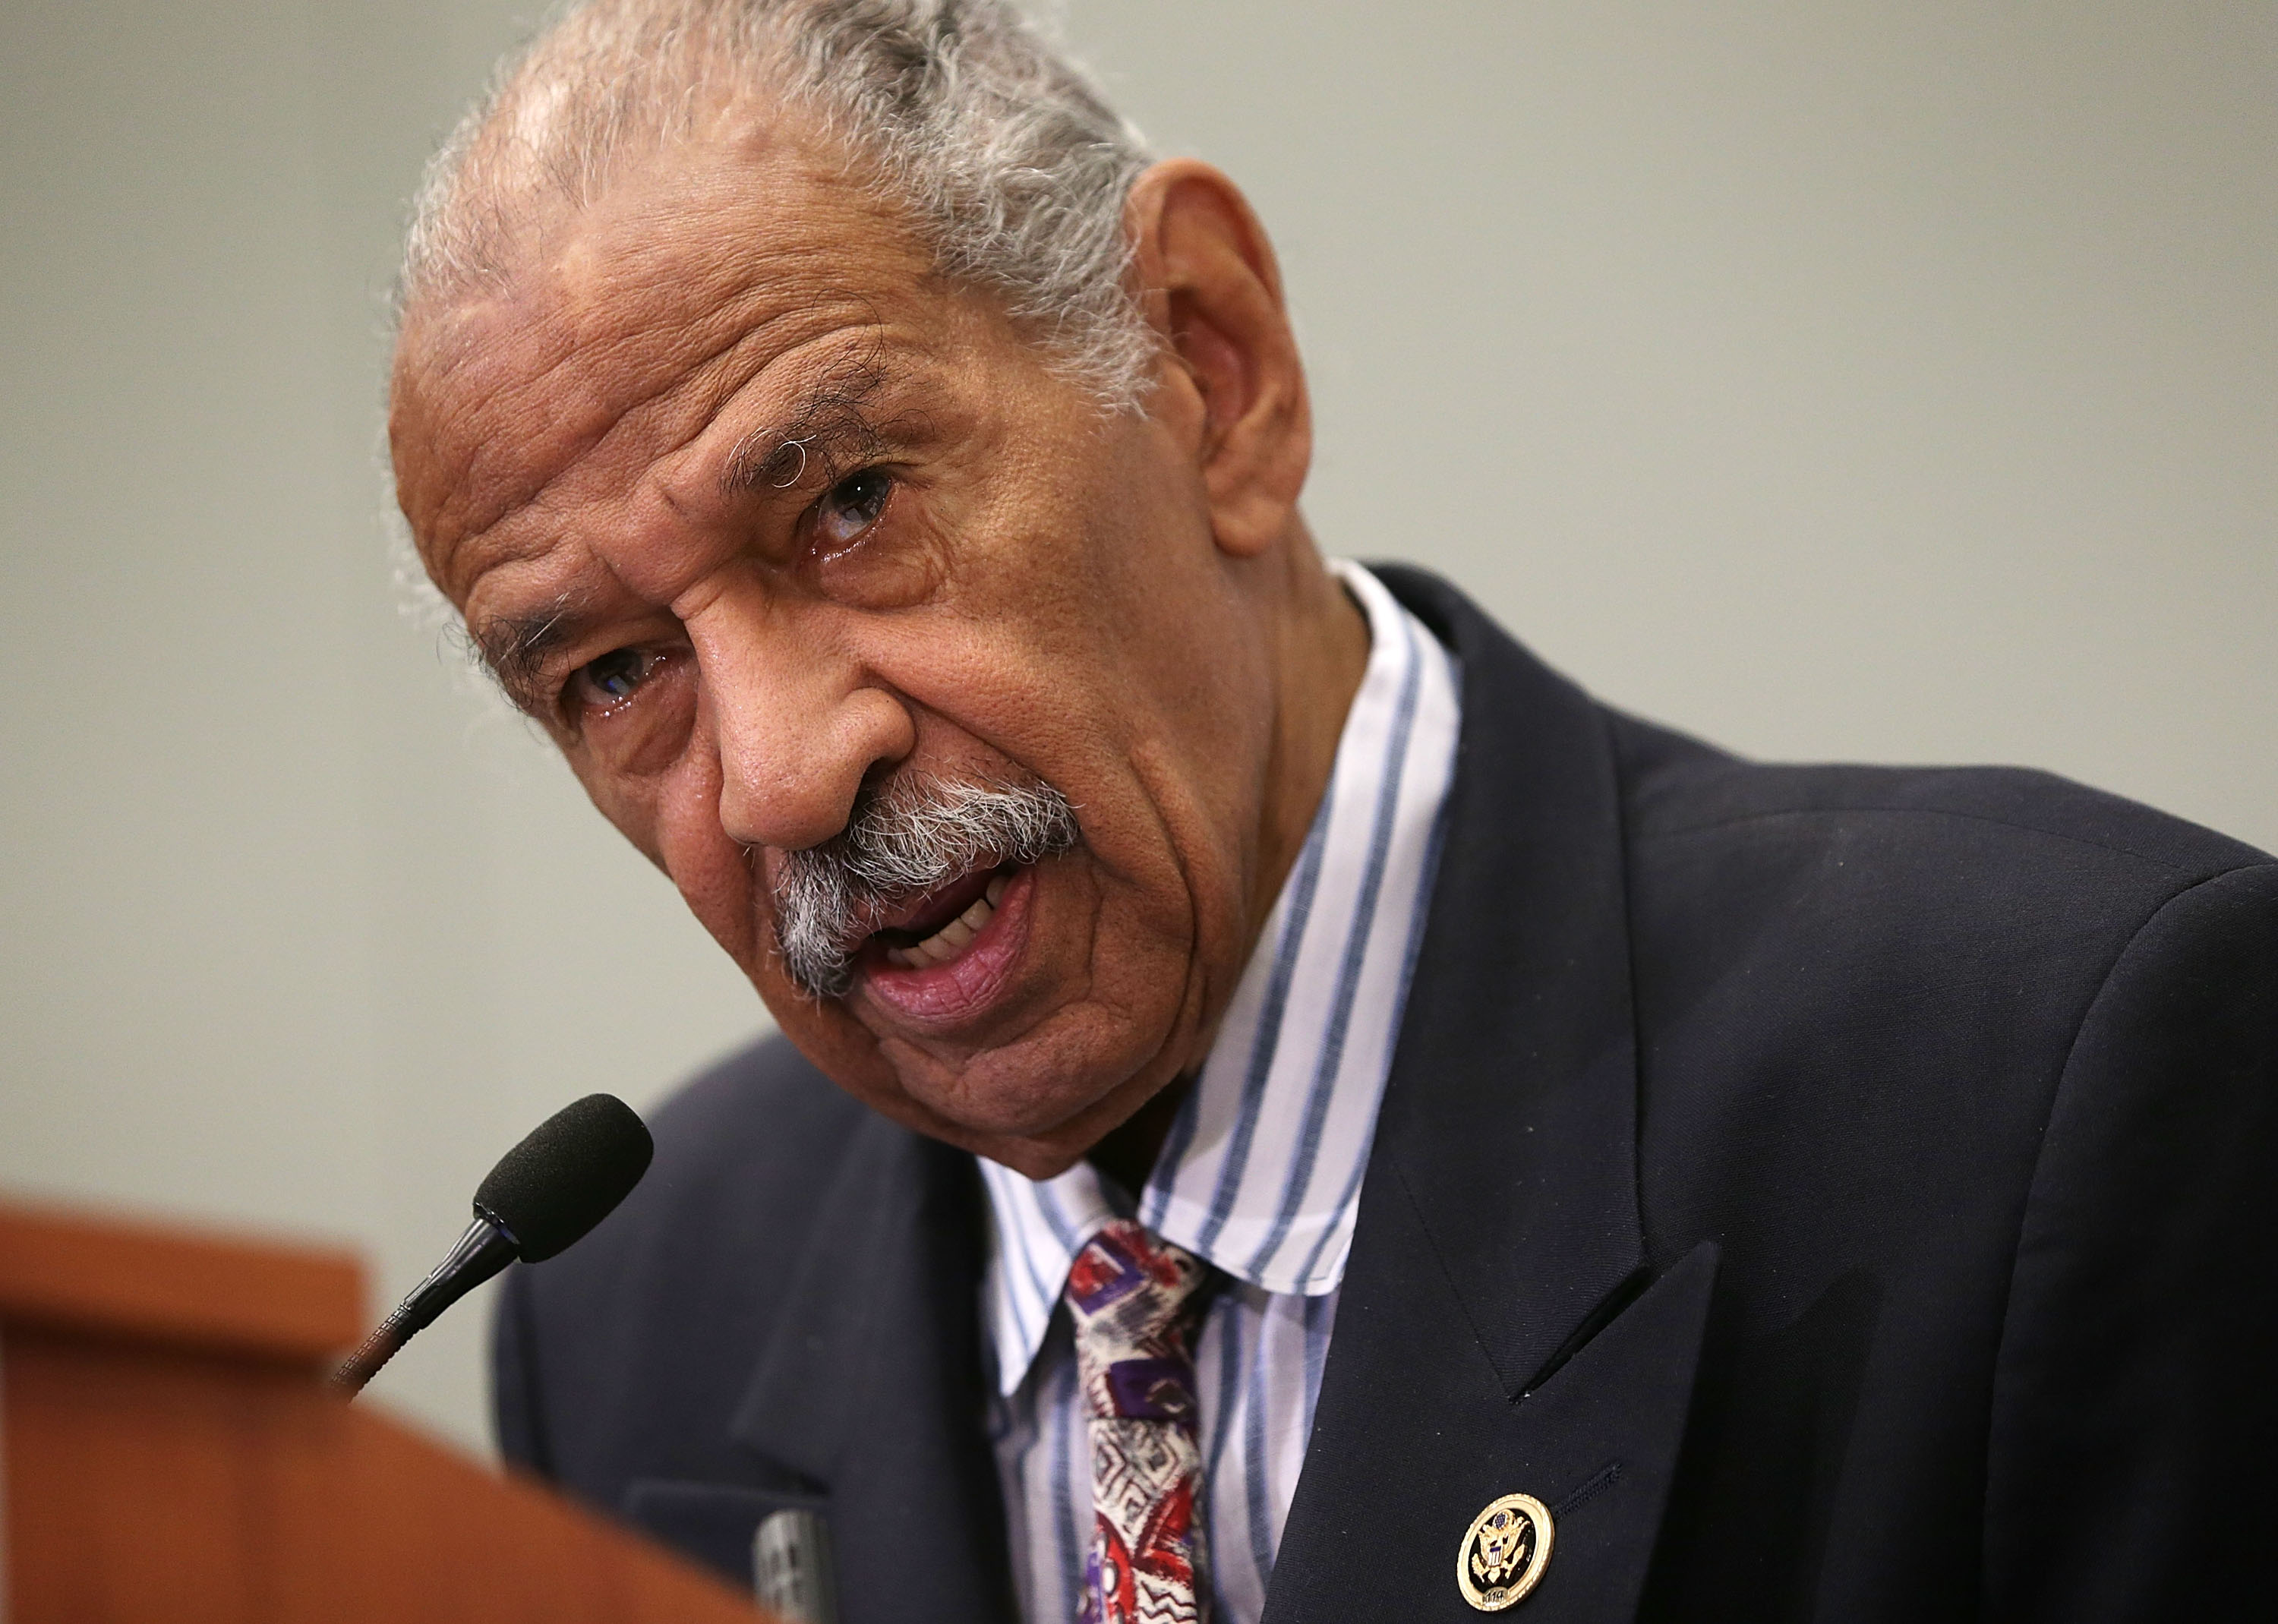 Rep. John Conyers (D-MI) speaks at a session during the Congressional Black Caucus Foundation's 45th annual legislative conference in in Washington, D.C., on Sept. 18, 2015. (Alex Wong—Getty Images)